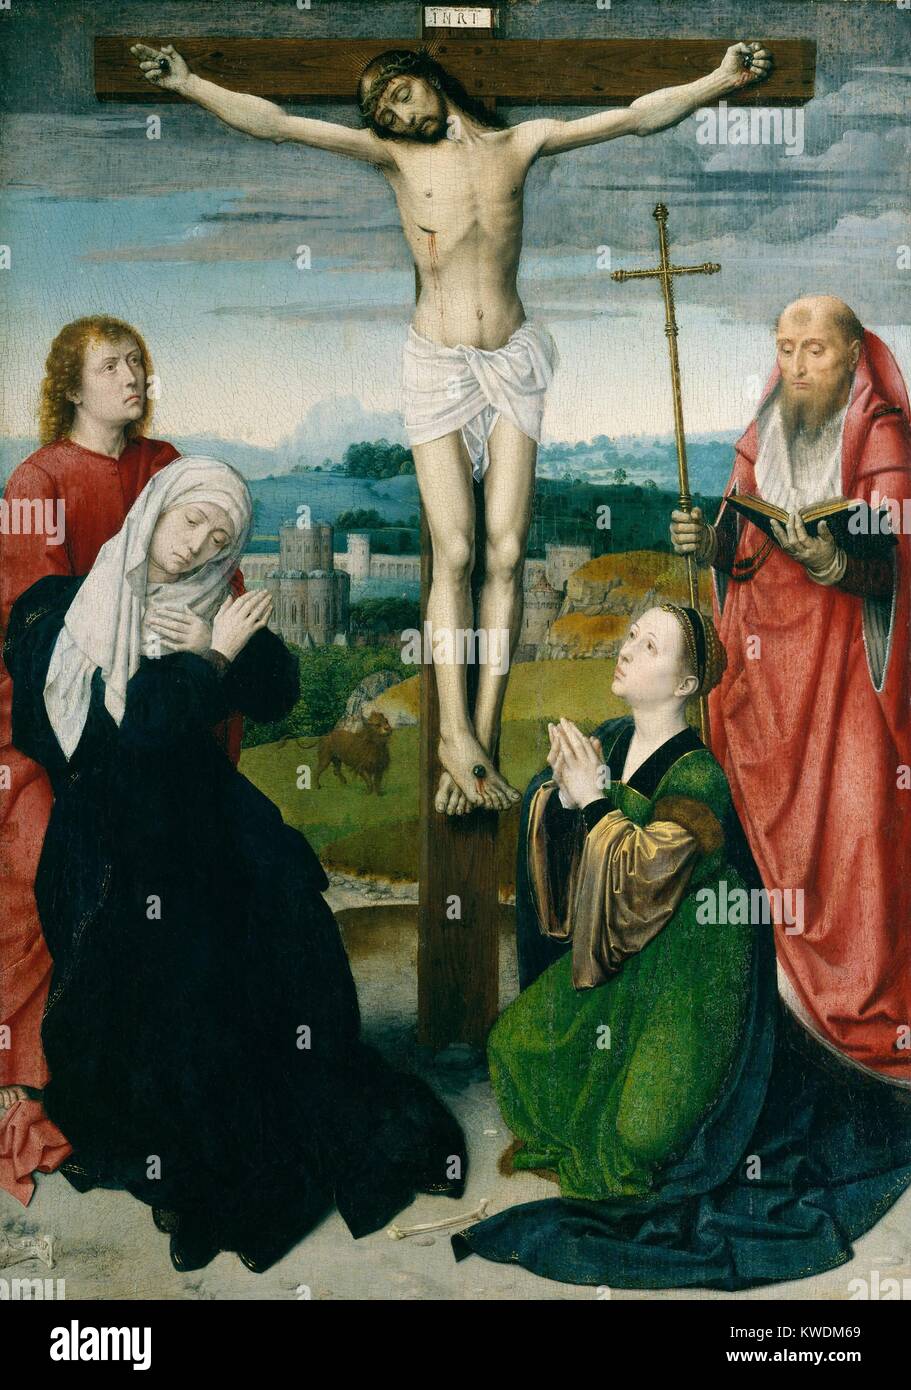 THE CRUCIFIXION, by Gerard David, 1495, Netherlandish, Northern Renaissance painting, oil on wood. Crucifixion includes the Church Father, Saint Jerome, reading about the crucifixion in the Latin Bible he translated from the Greek. The artist illustrated the scripture account with the sky that darkened at Christs death. In the background is a representation of Jerusalem (BSLOC 2017 16 105) Stock Photo